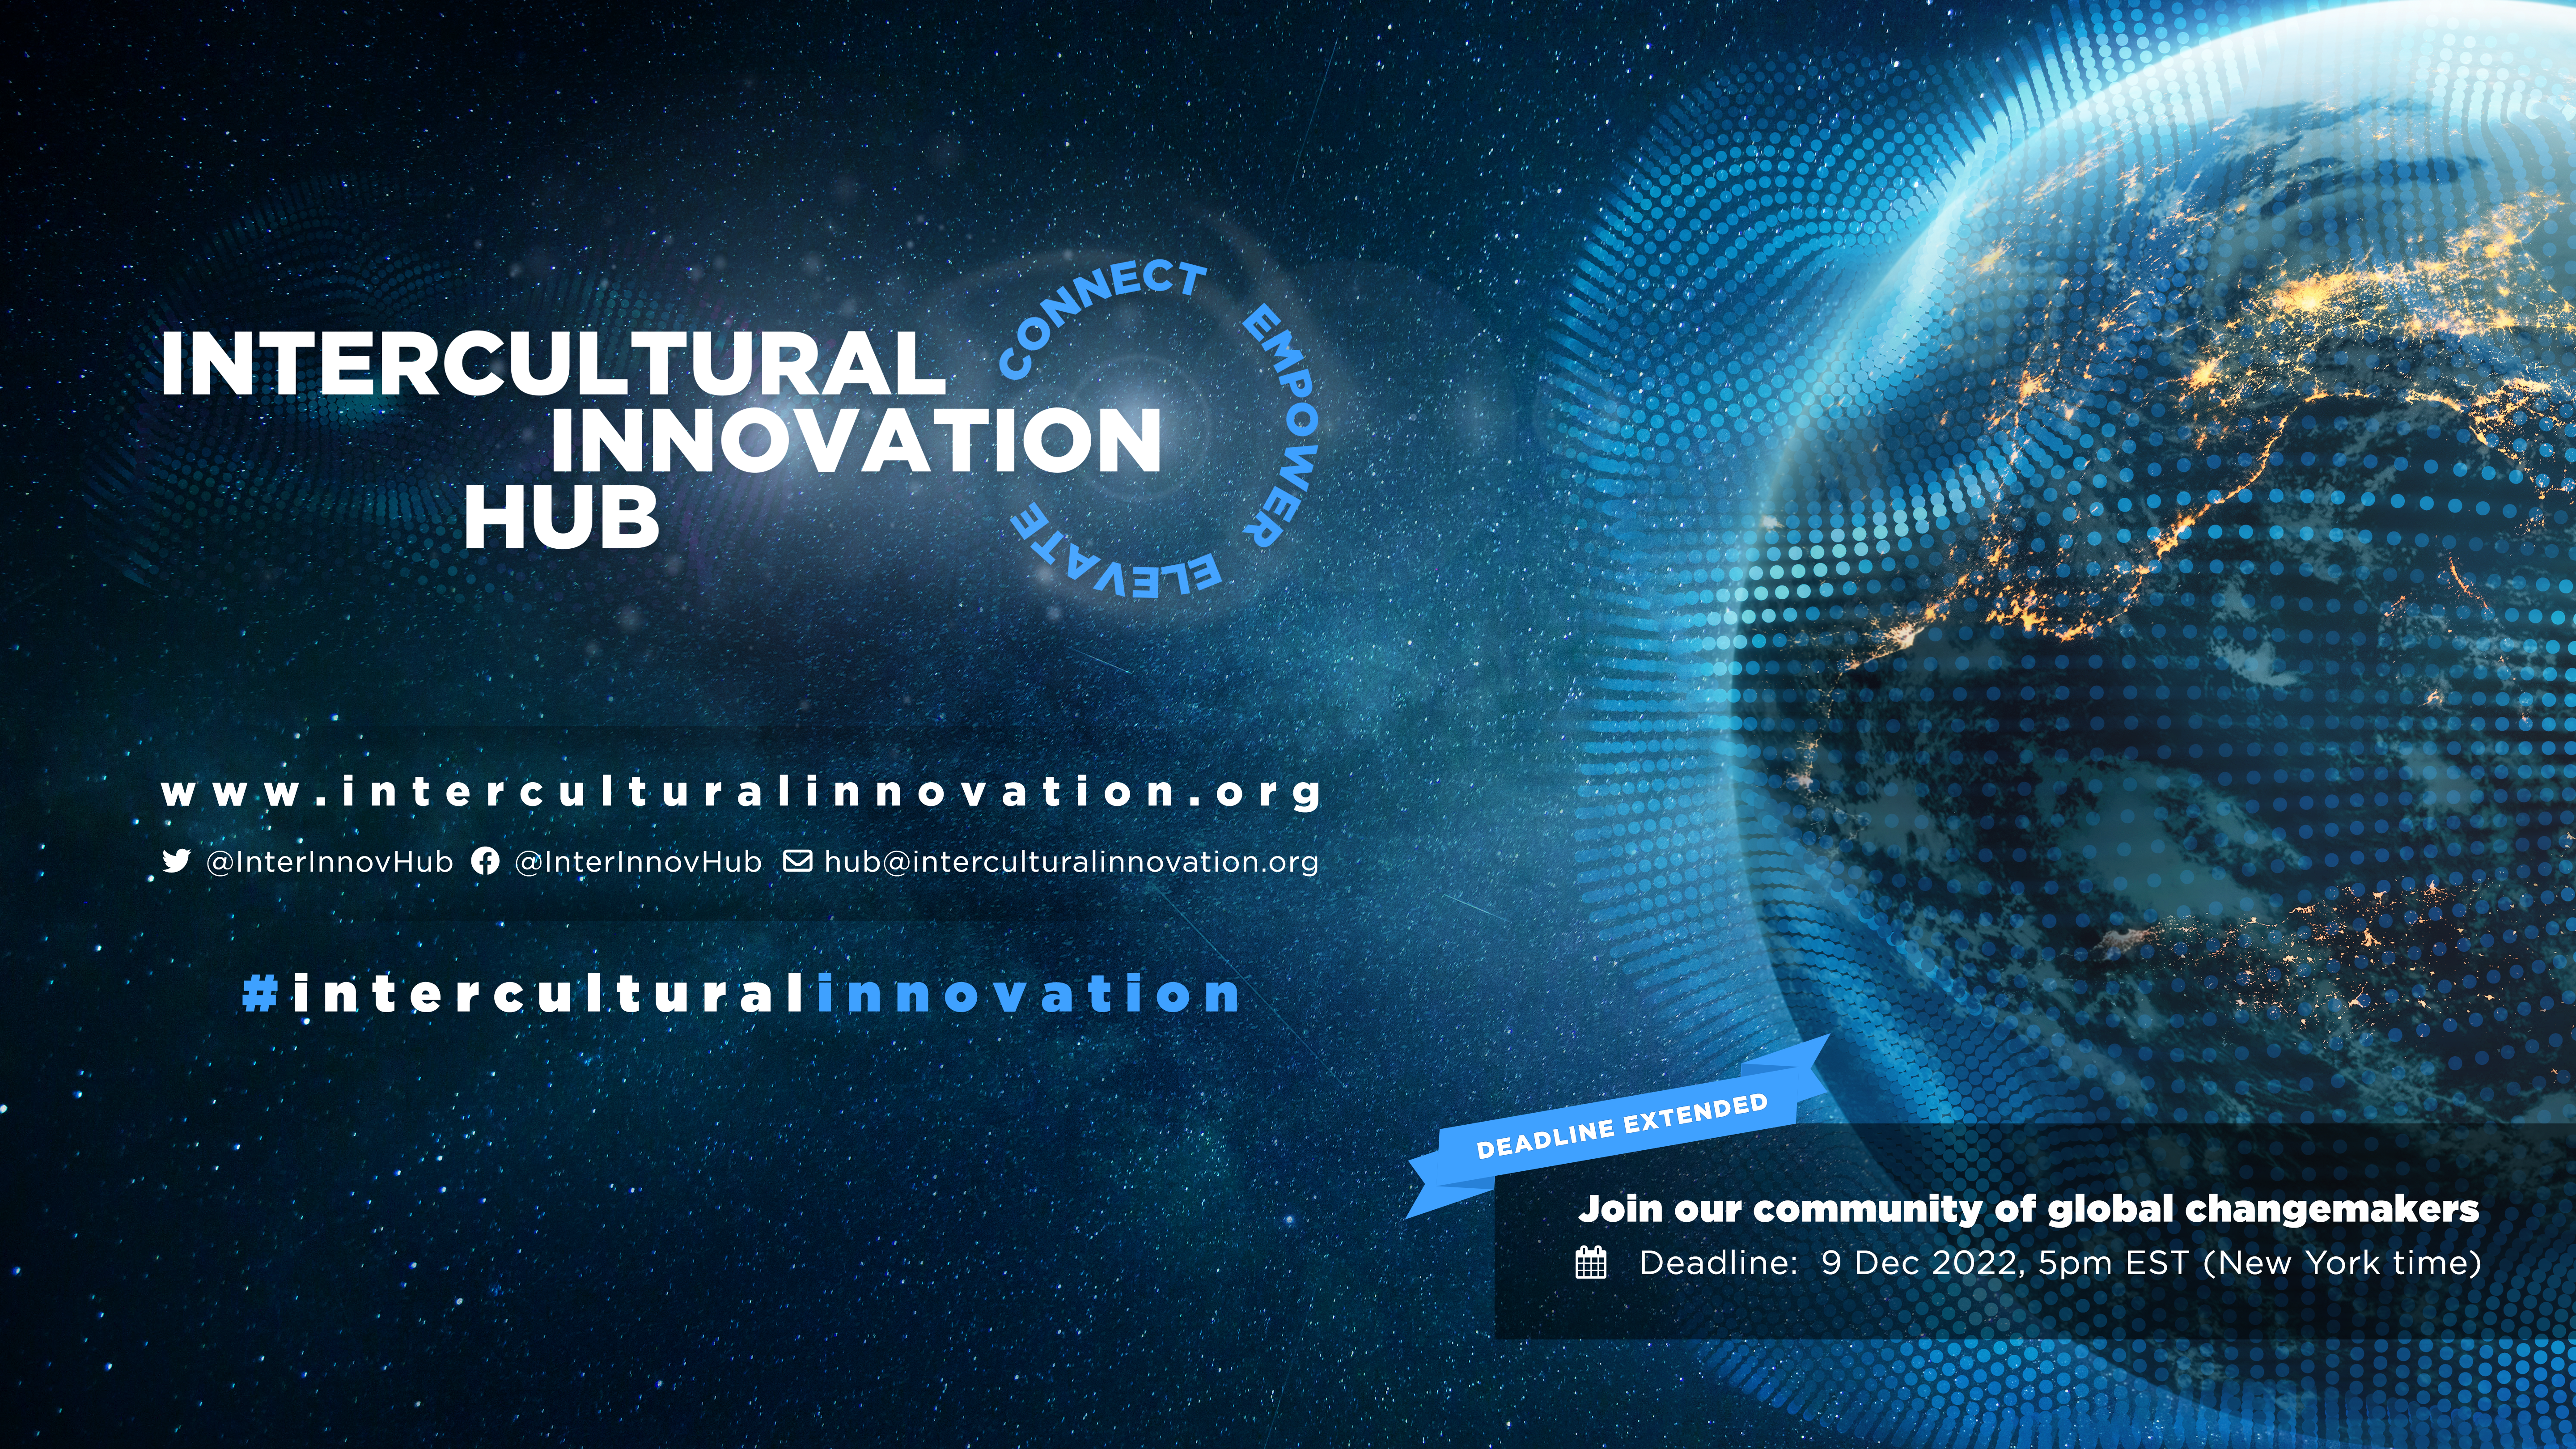 Intercultural Innovation Hub: Calling projects promoting an inclusive and diverse society